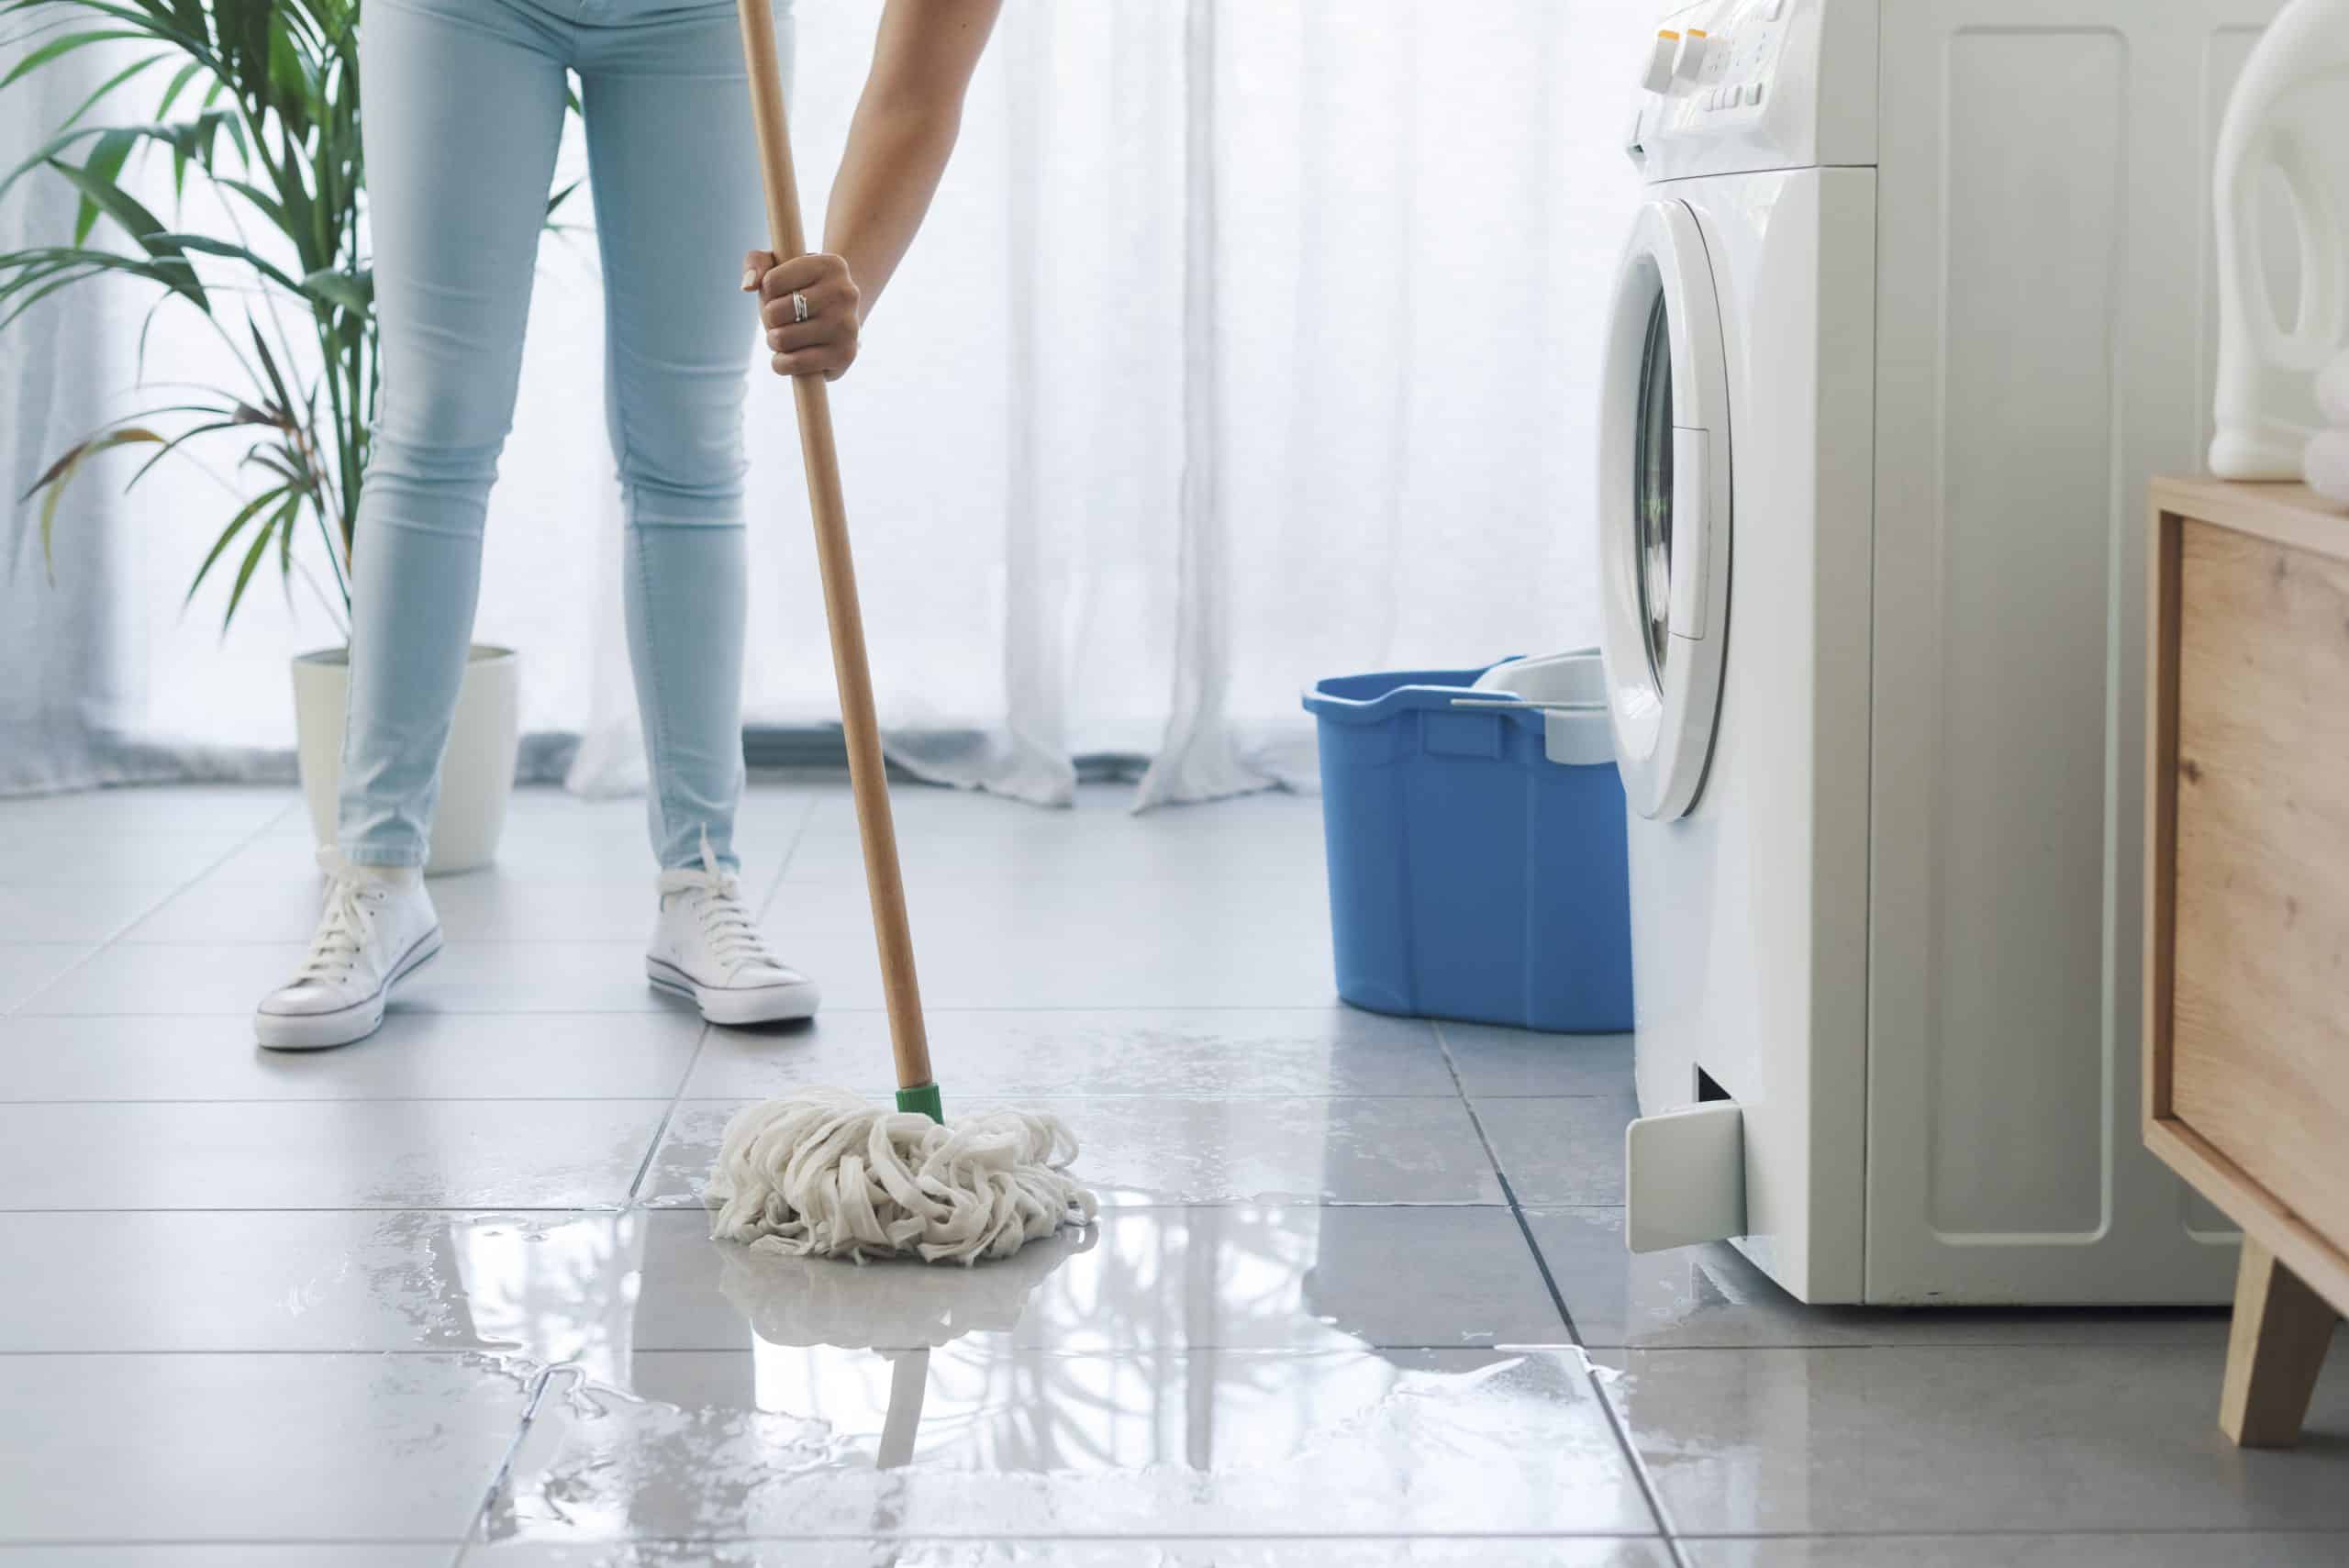 Woman cleaning with a mop her washing machine flood